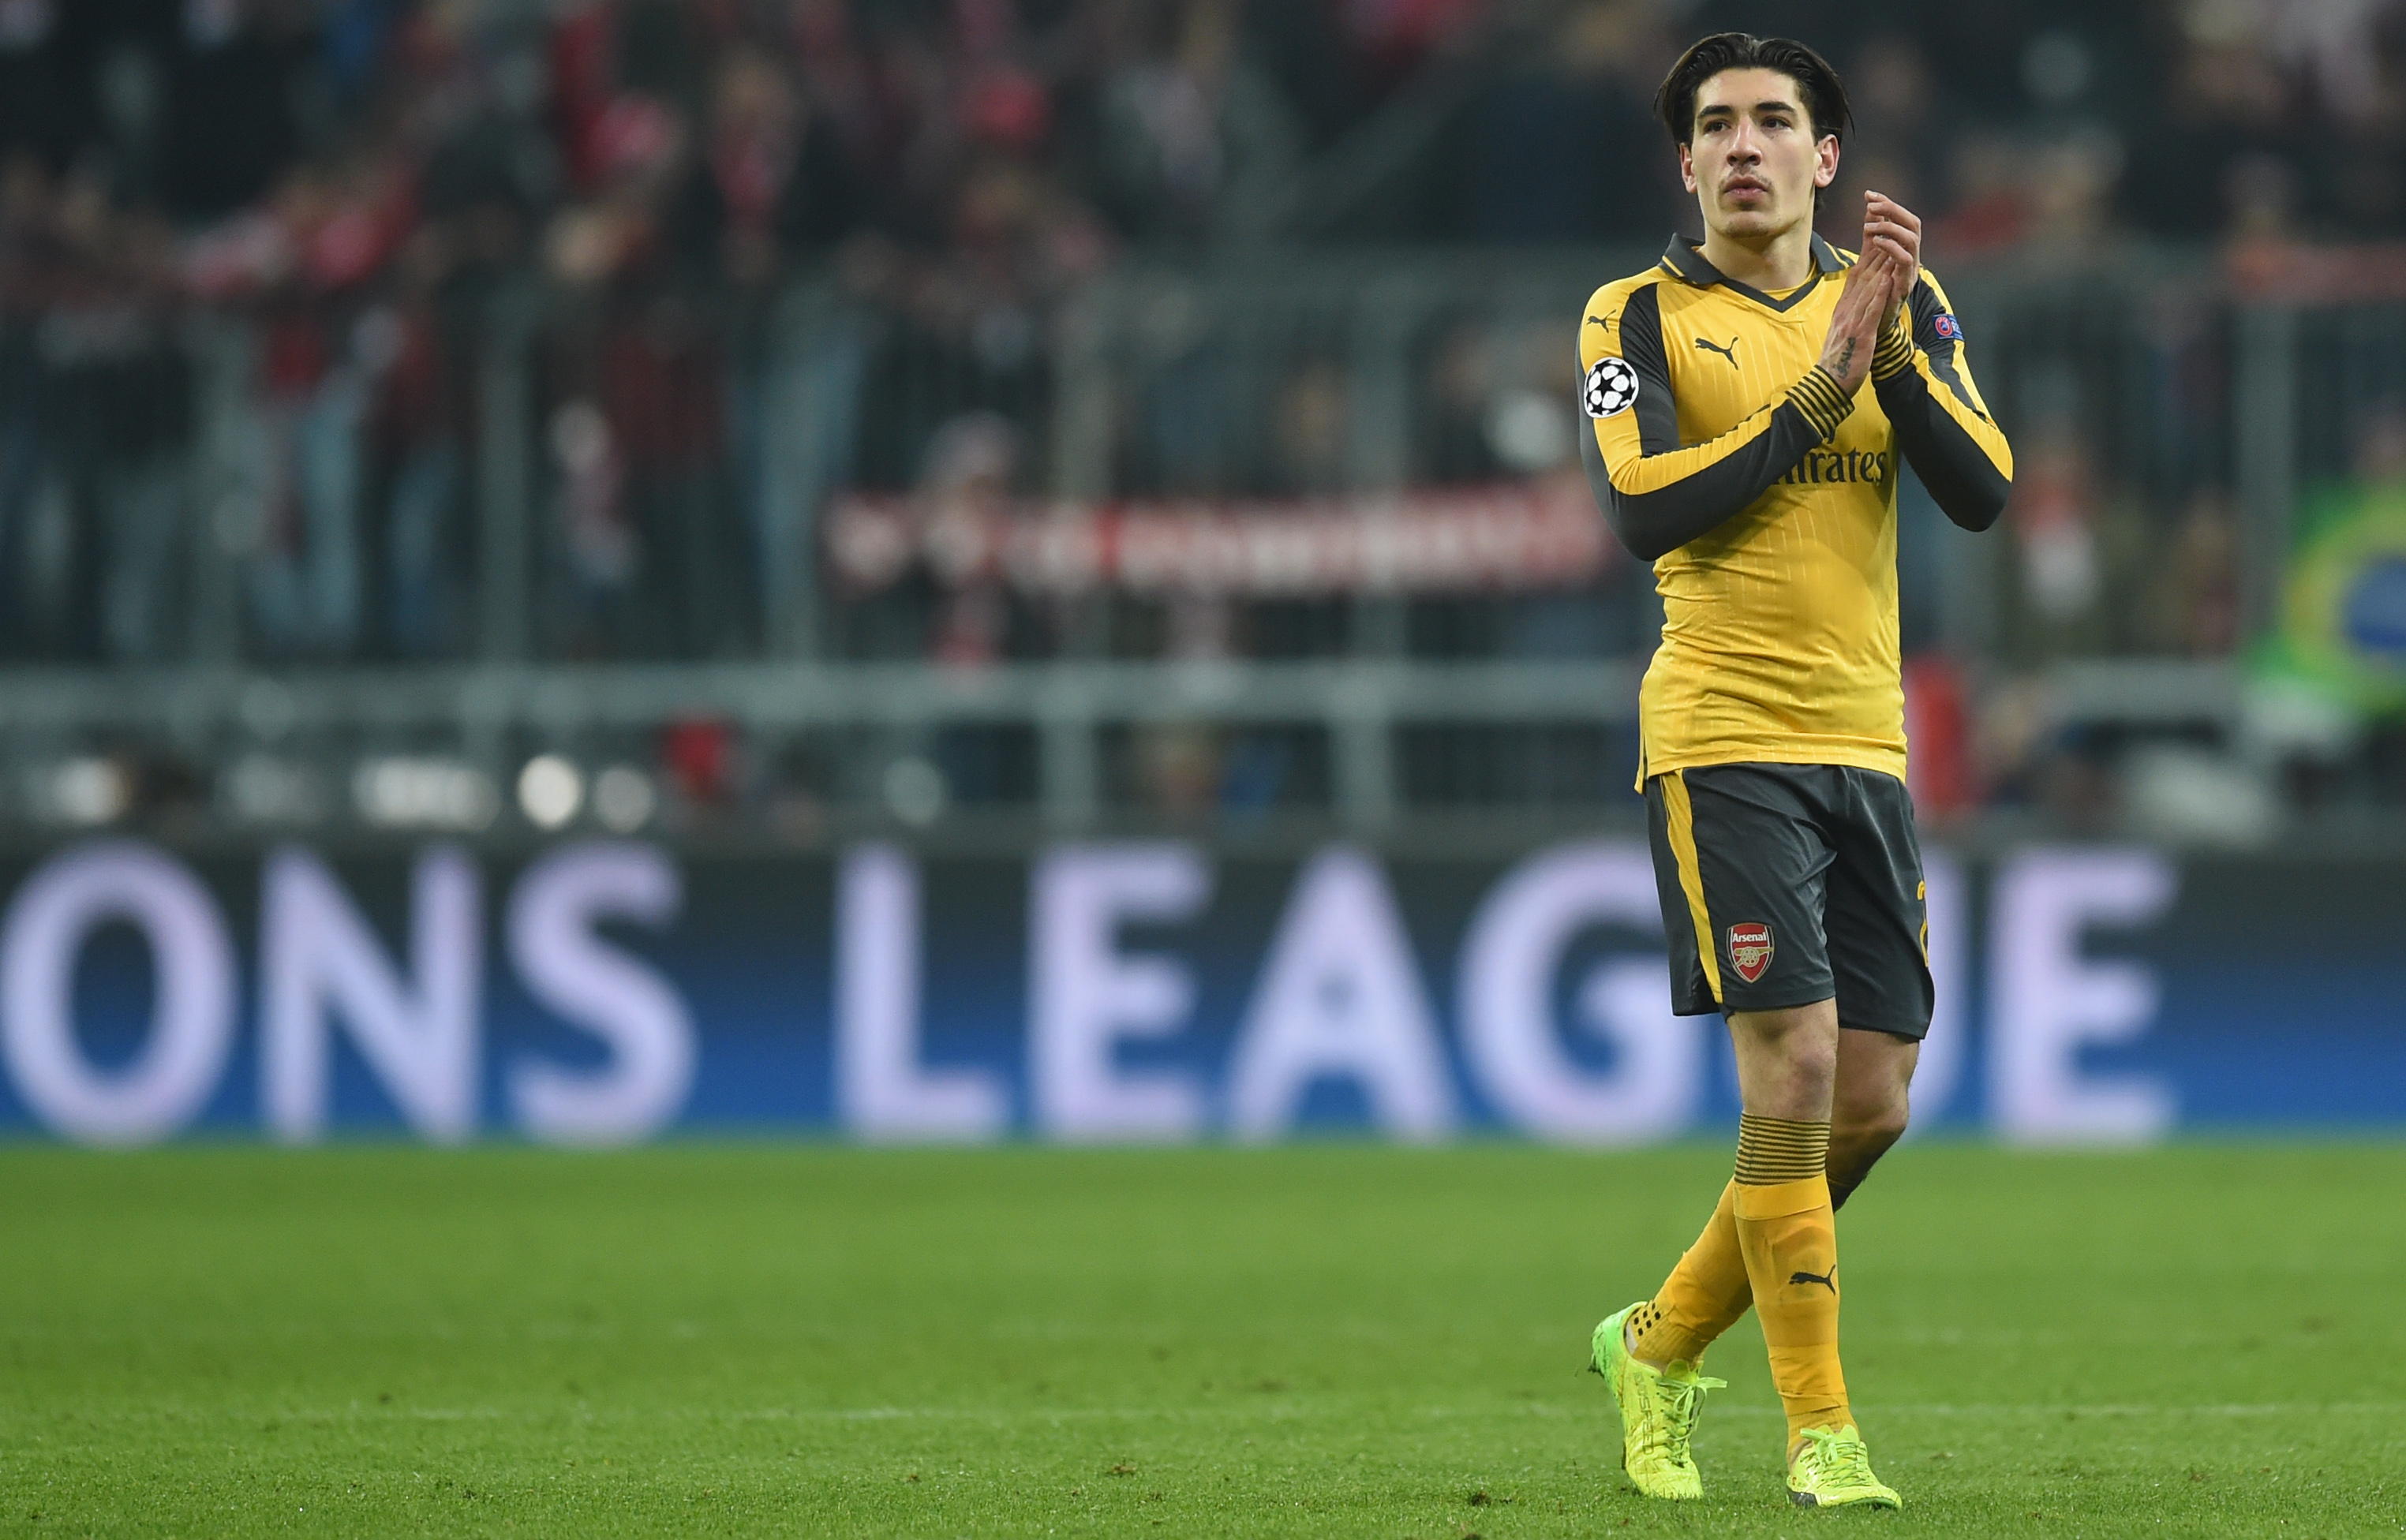 Arsenal's Spanish defender Hector Bellerin leaves the field the UEFA Champions League round of sixteen football match between FC Bayern Munich and Arsenal in Munich, southern Germany, on February 15, 2017.  / AFP / Christof STACHE        (Photo credit should read CHRISTOF STACHE/AFP/Getty Images)